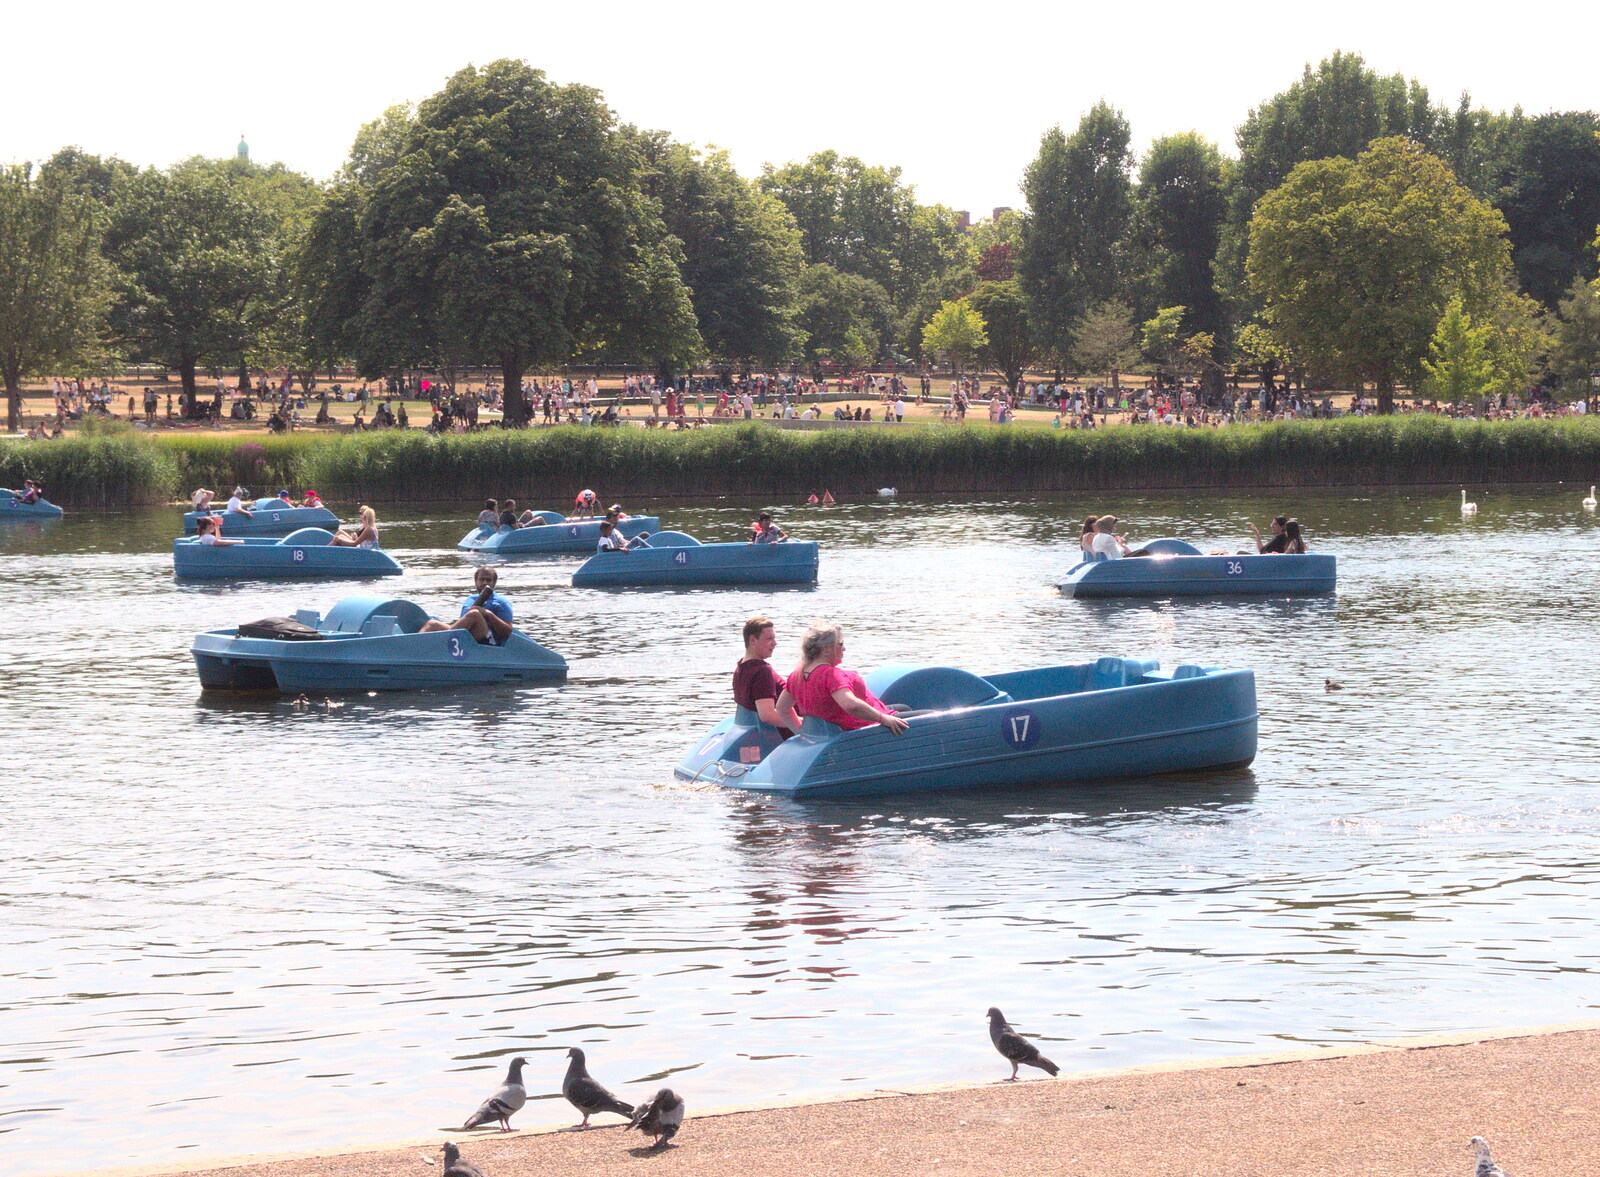 Pedalos and a crowded Hyde Park from The BSCC at The Crown and Hot Summer Days, Diss, Pulham and London - 24th July 2018